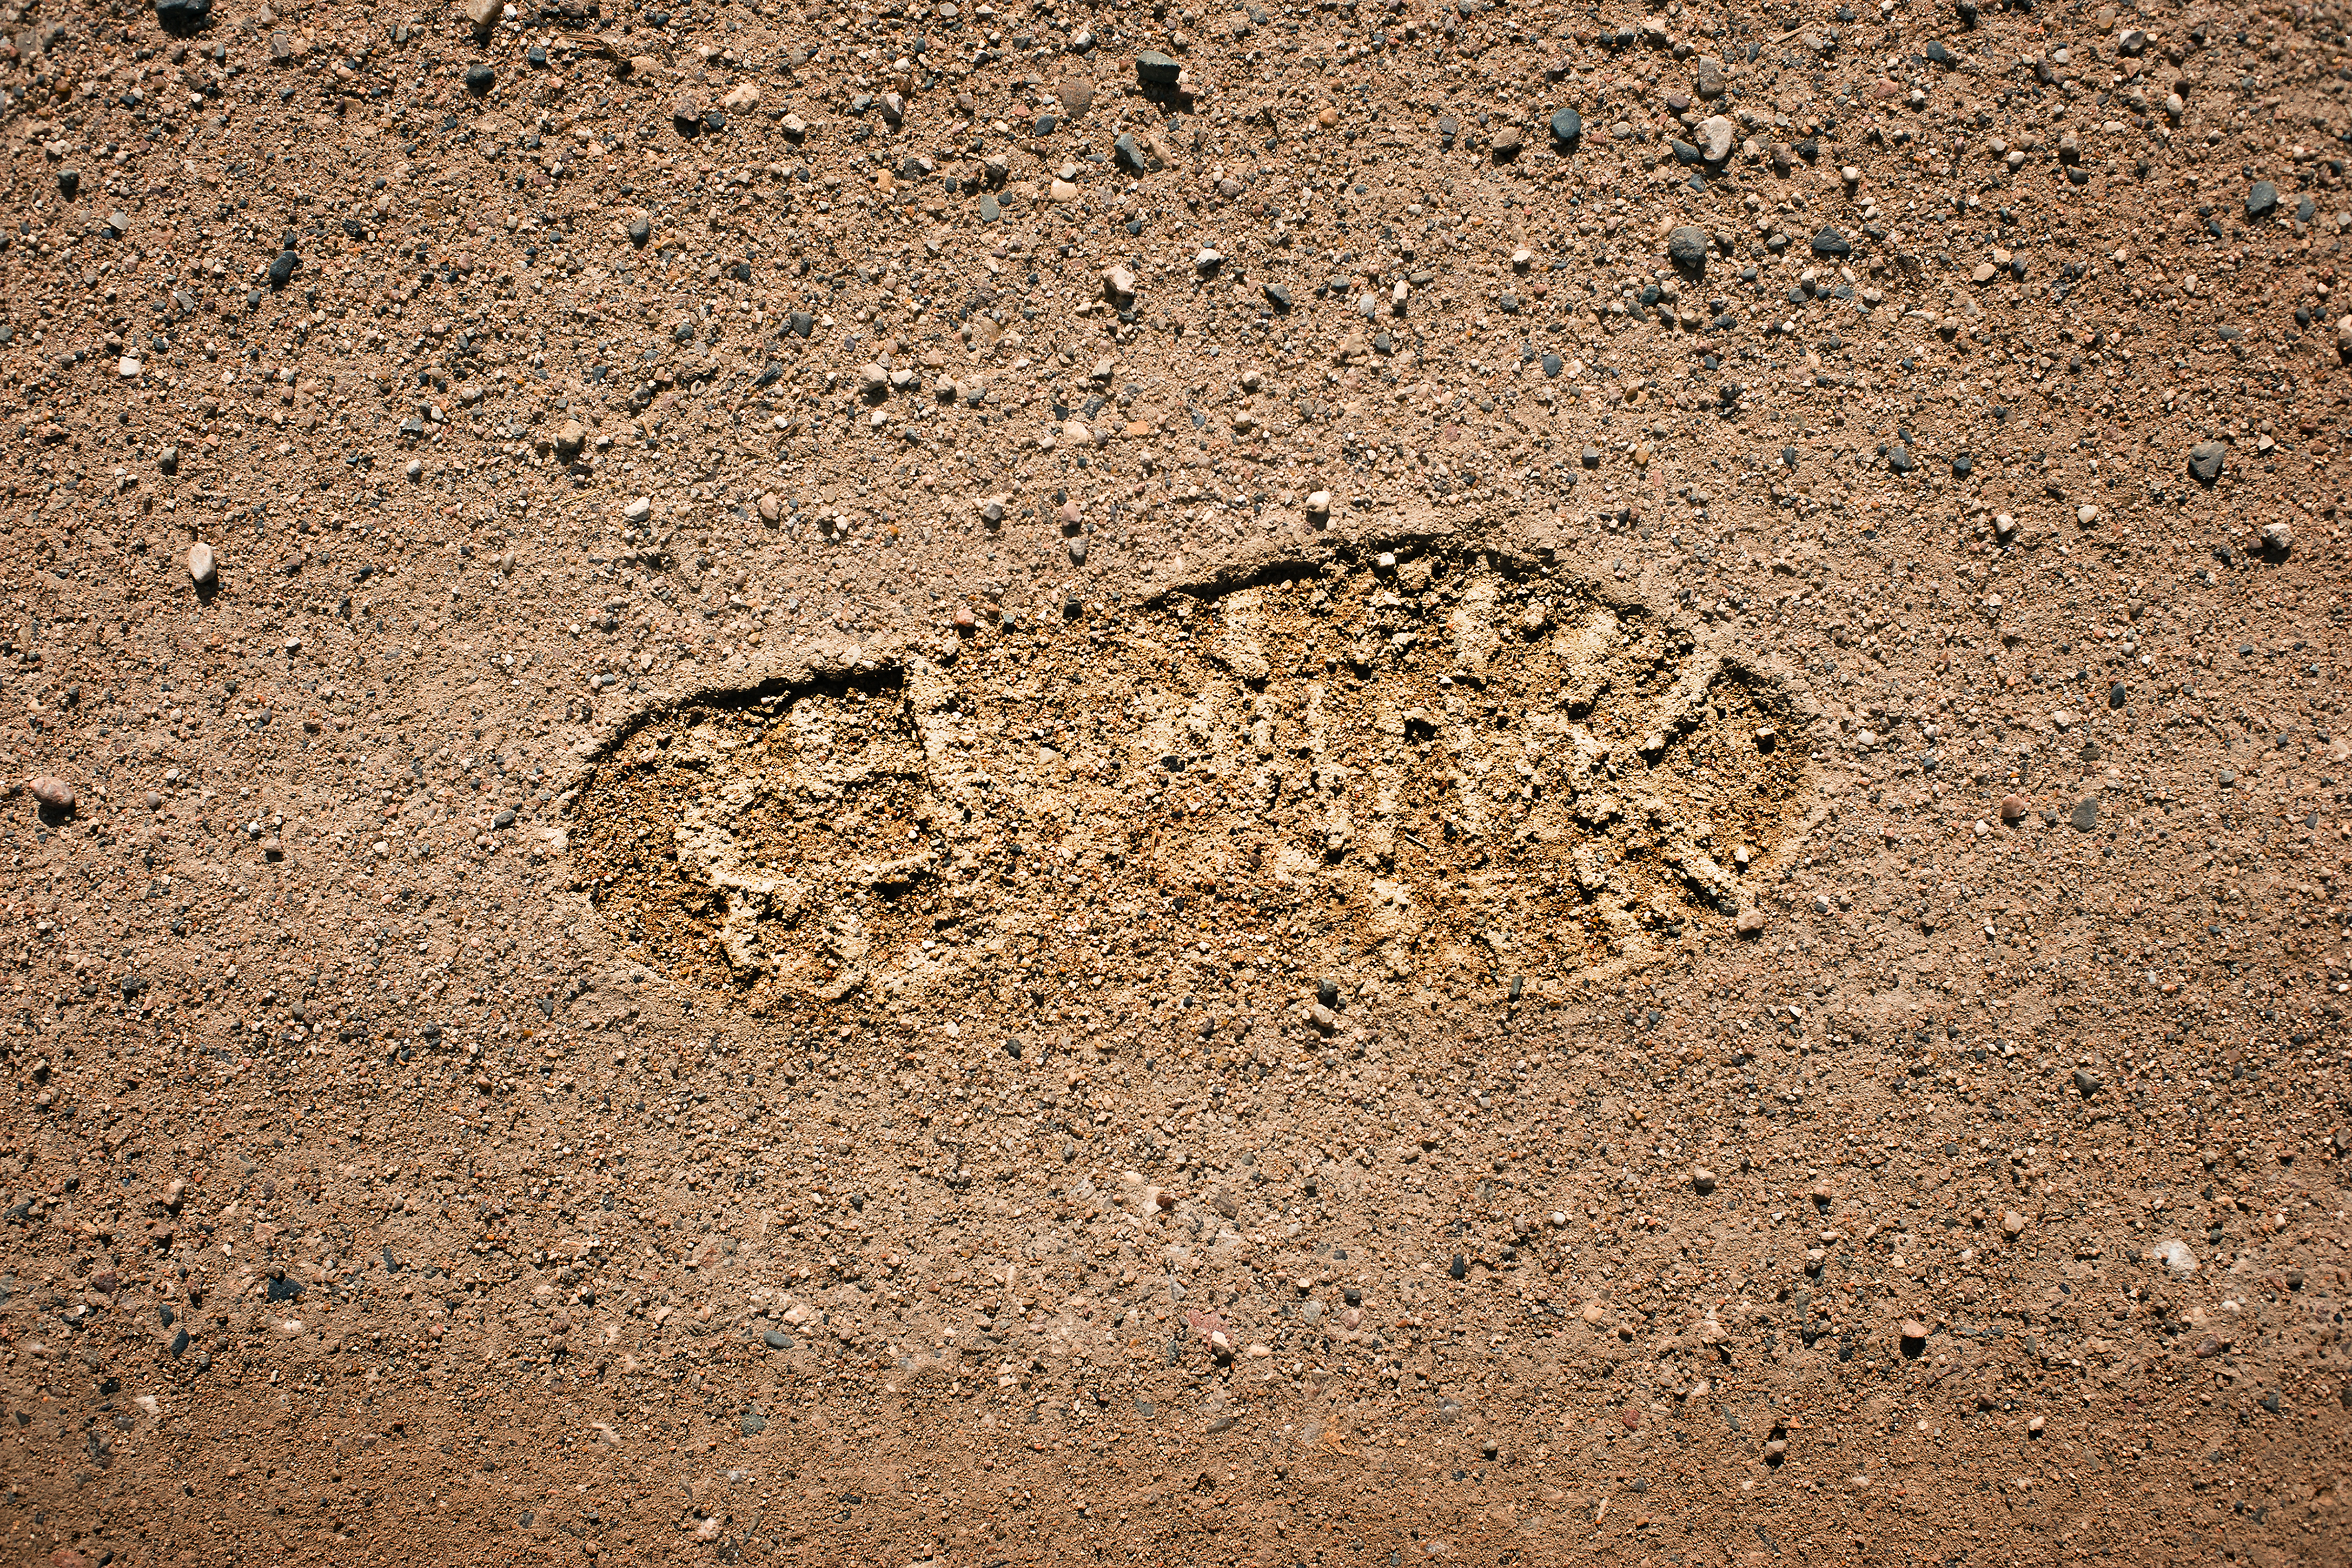 Footprint of shoe or boot on the dry soil. | Source: Shutterstock